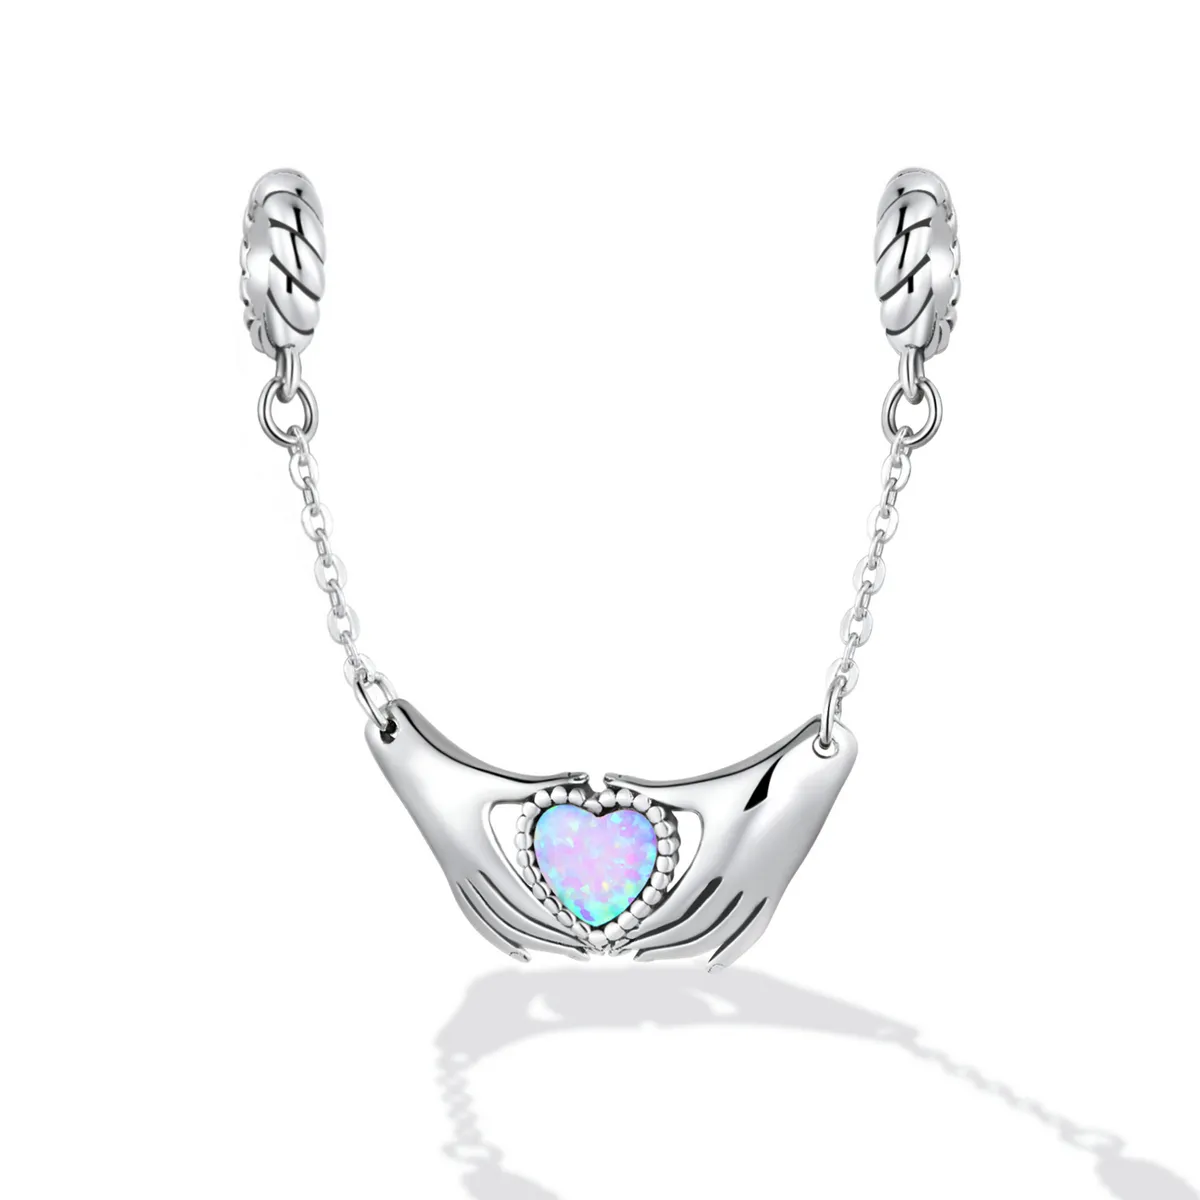 Pandora Style Family Heart Safety Chain - BSC597